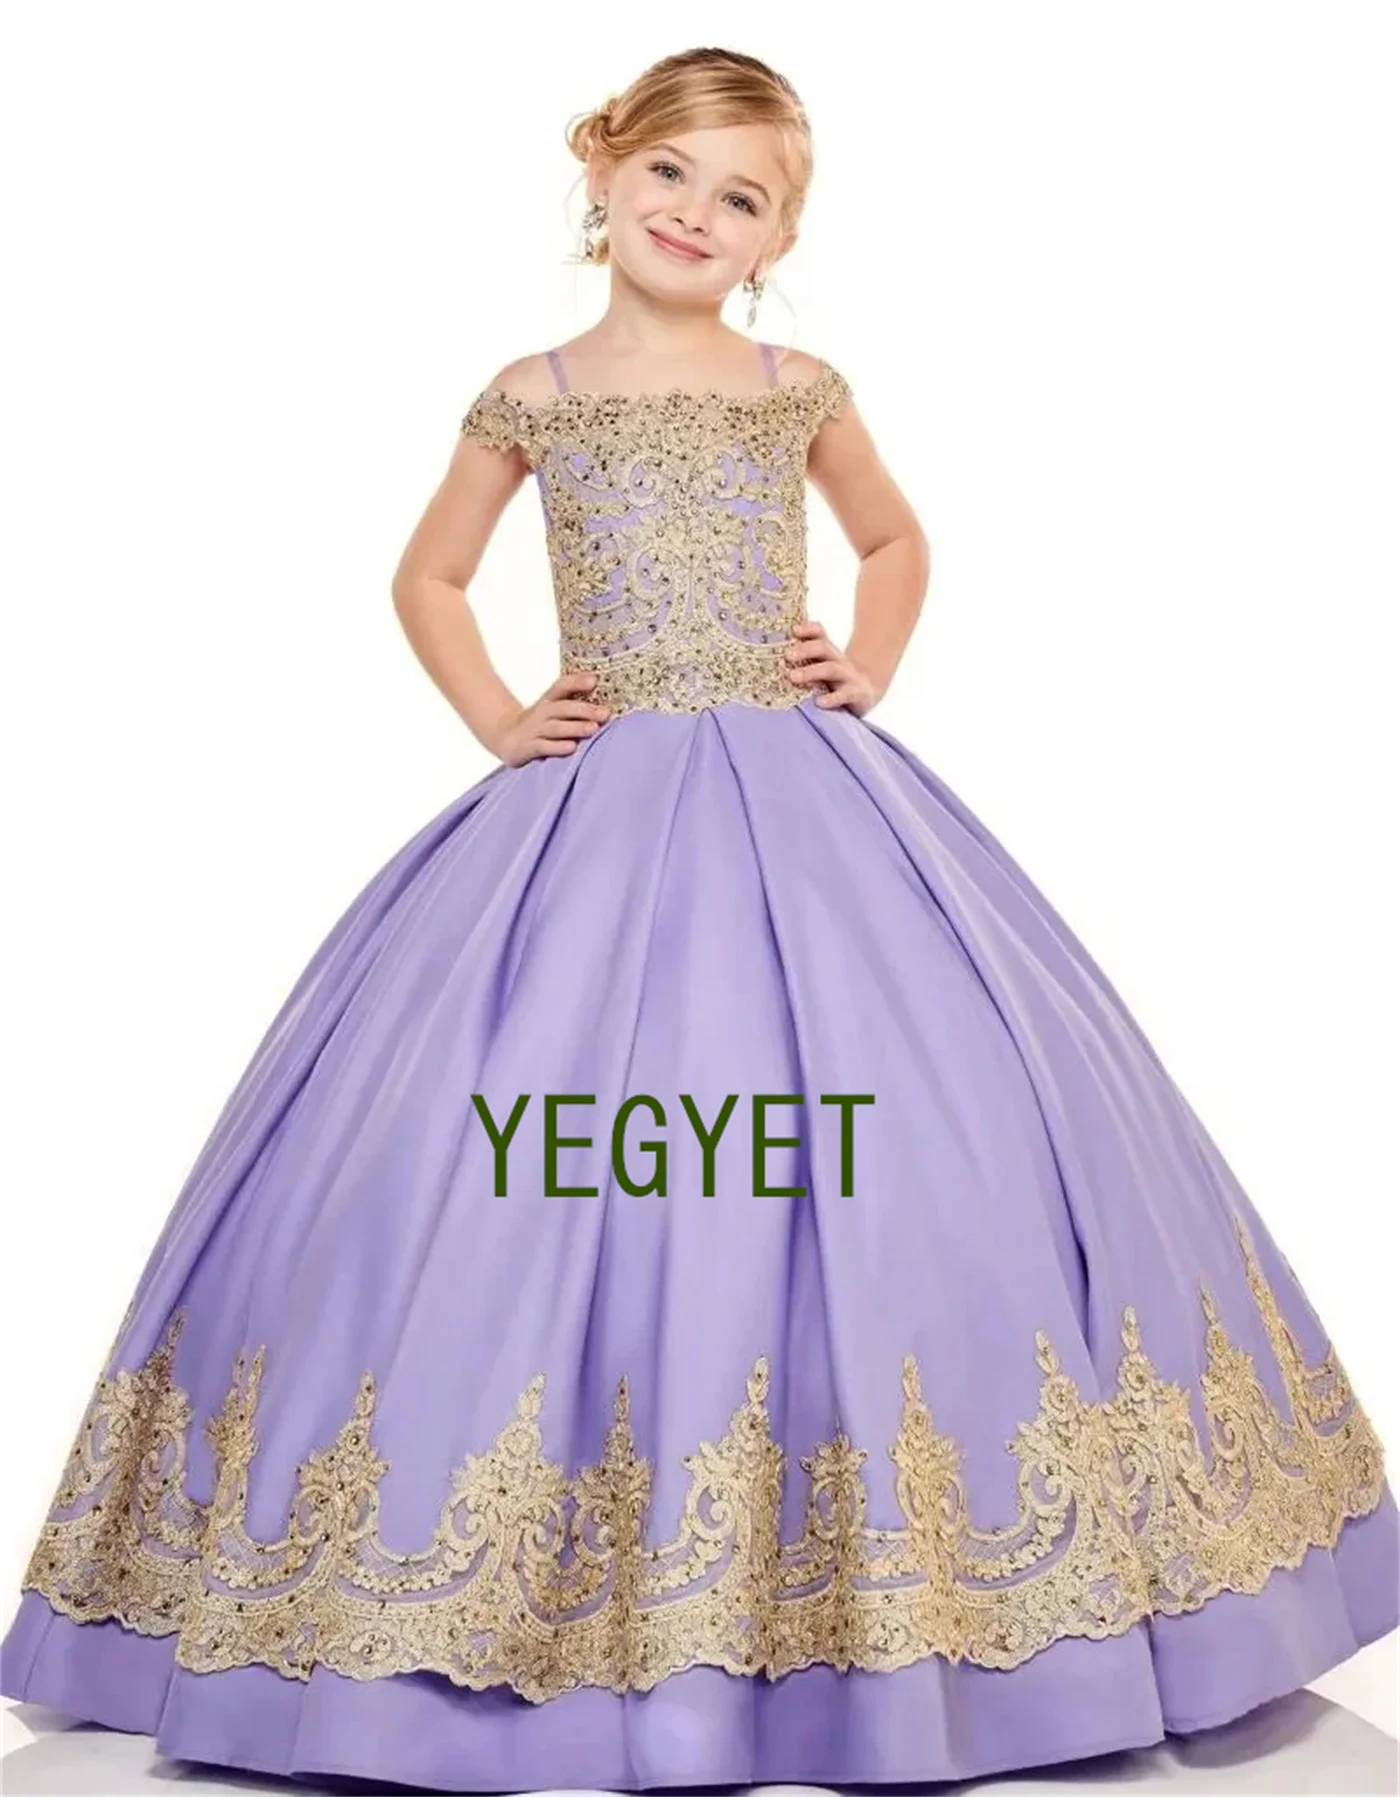 

Girl's Dresses Sweet Lilac Flower Girl Dress For Wedding Champagne Lace Off The Shoulder Ball Gown Long Birthday Party